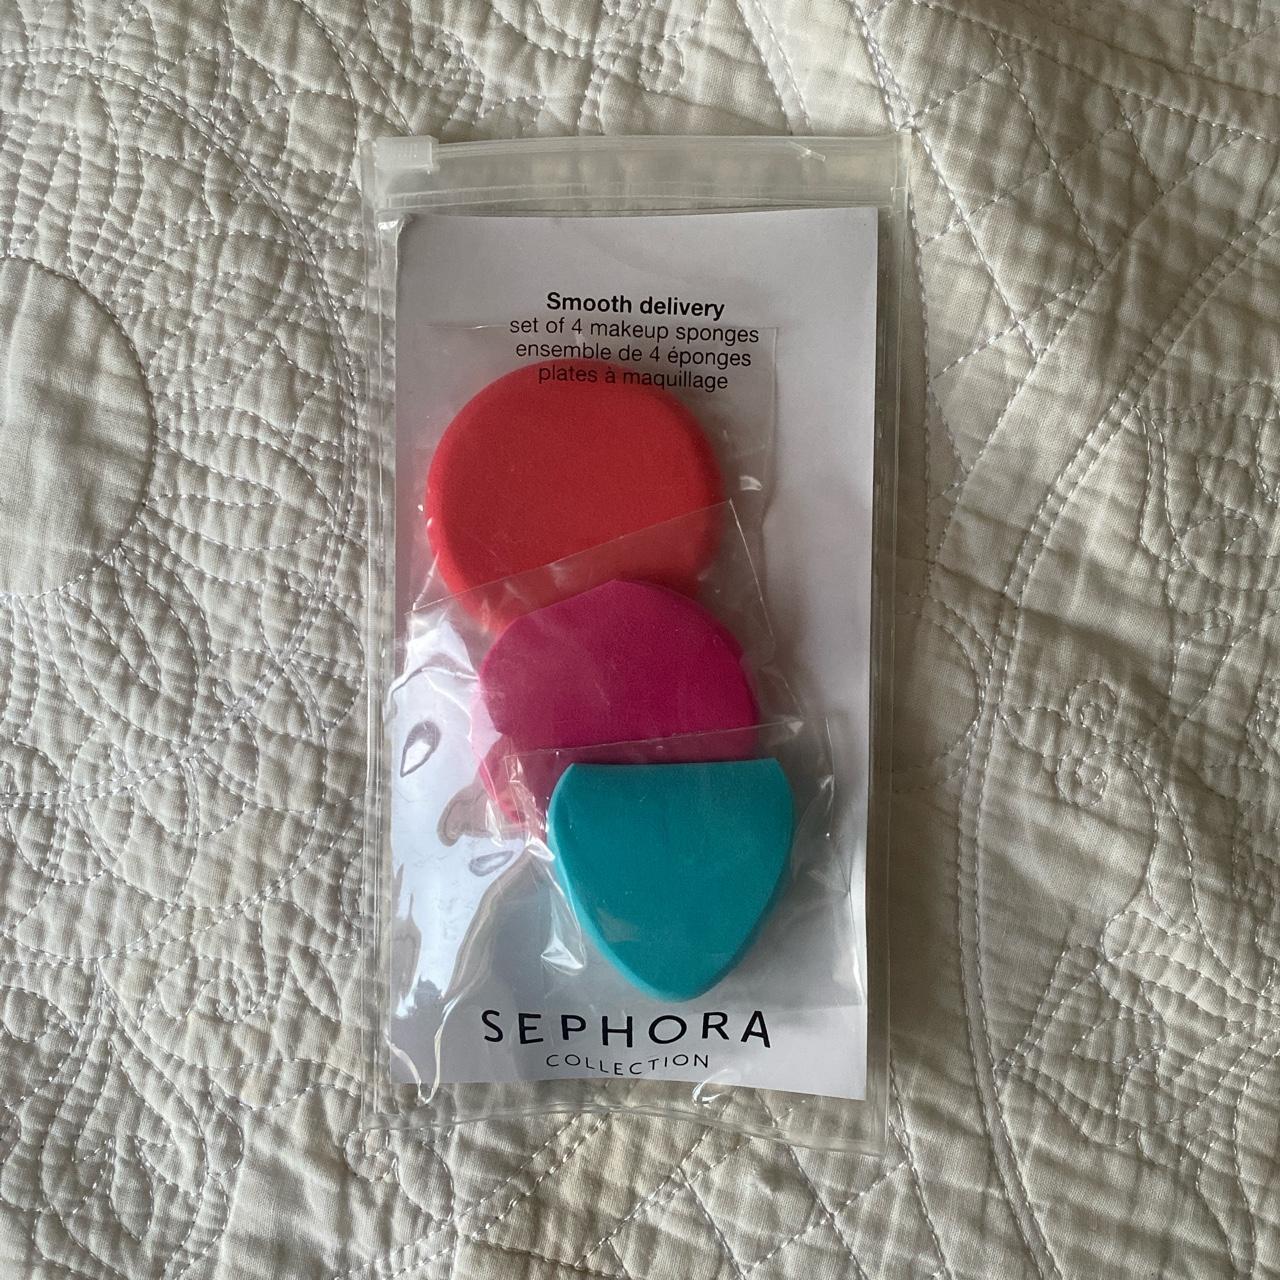 Sephora Women's Pink and Blue Accessory